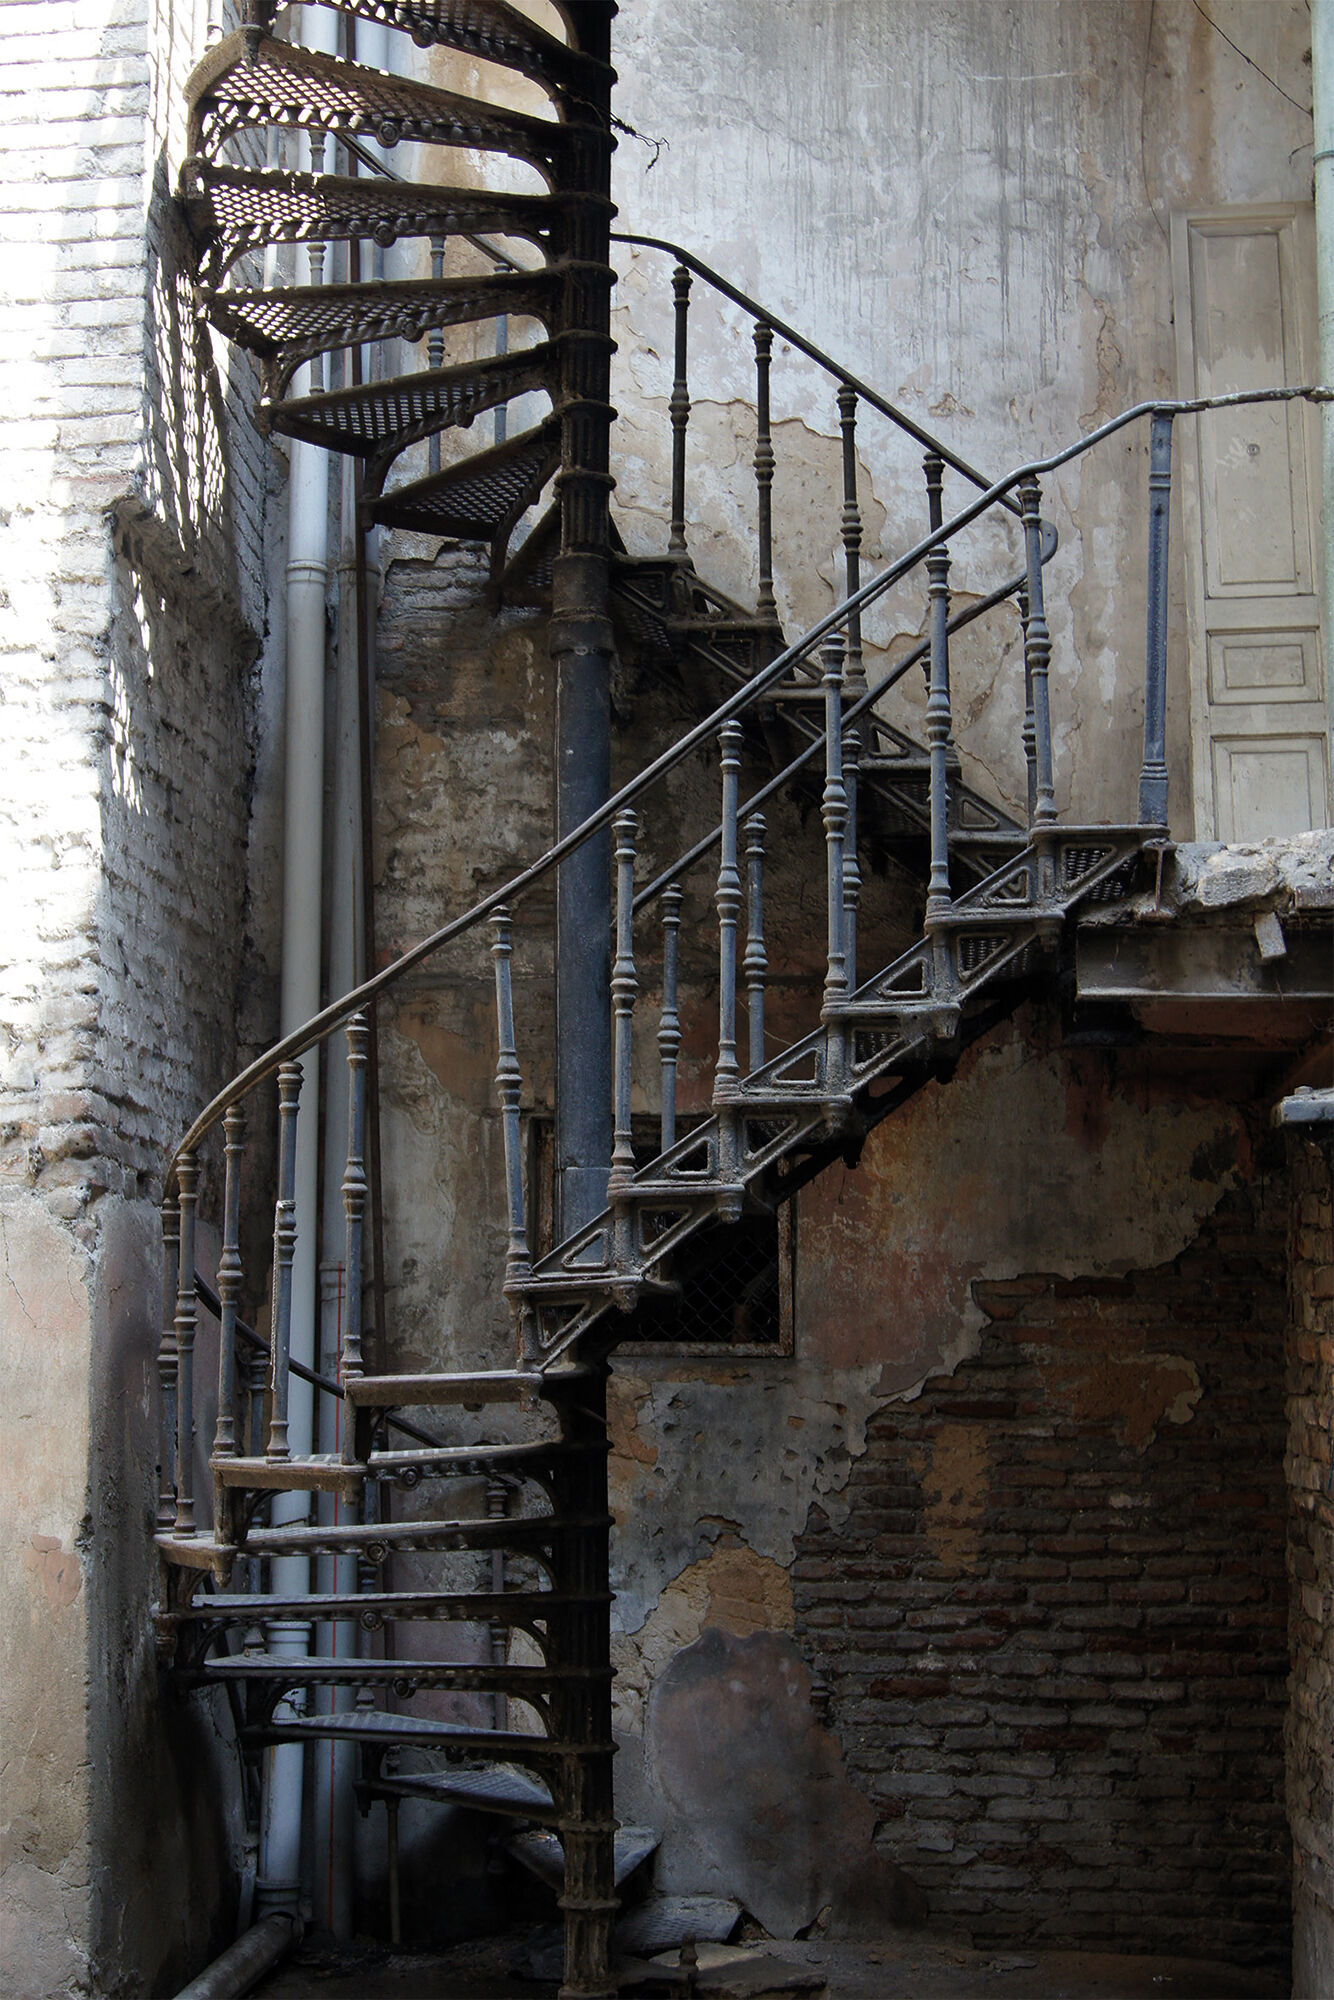 Picture "Vertical Metal Stairs" by Olivier Lacour